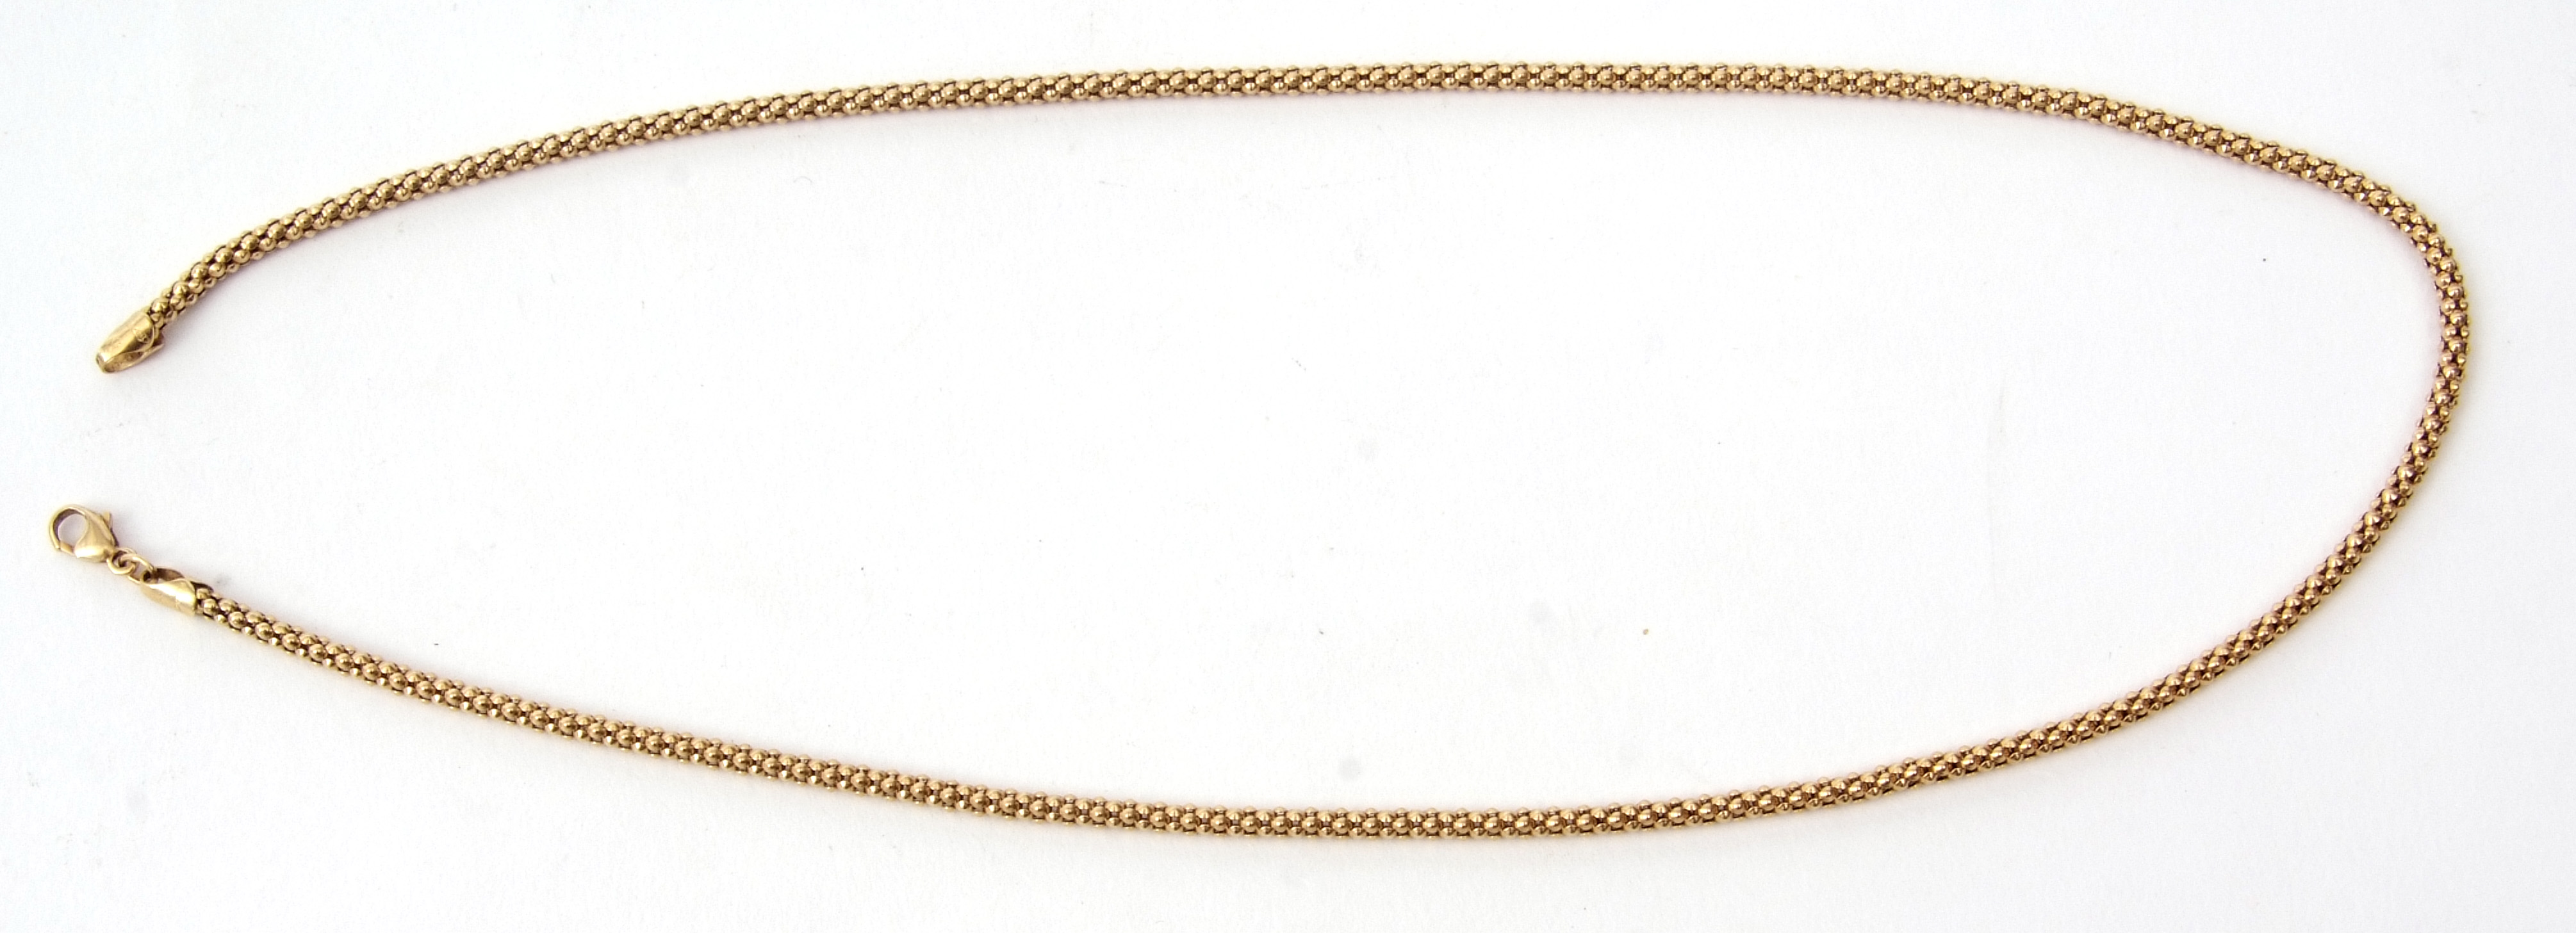 A 750 stamped fancy link necklace, 9.8gms, the clasp engraved "Stella", 46cm long - Image 2 of 2